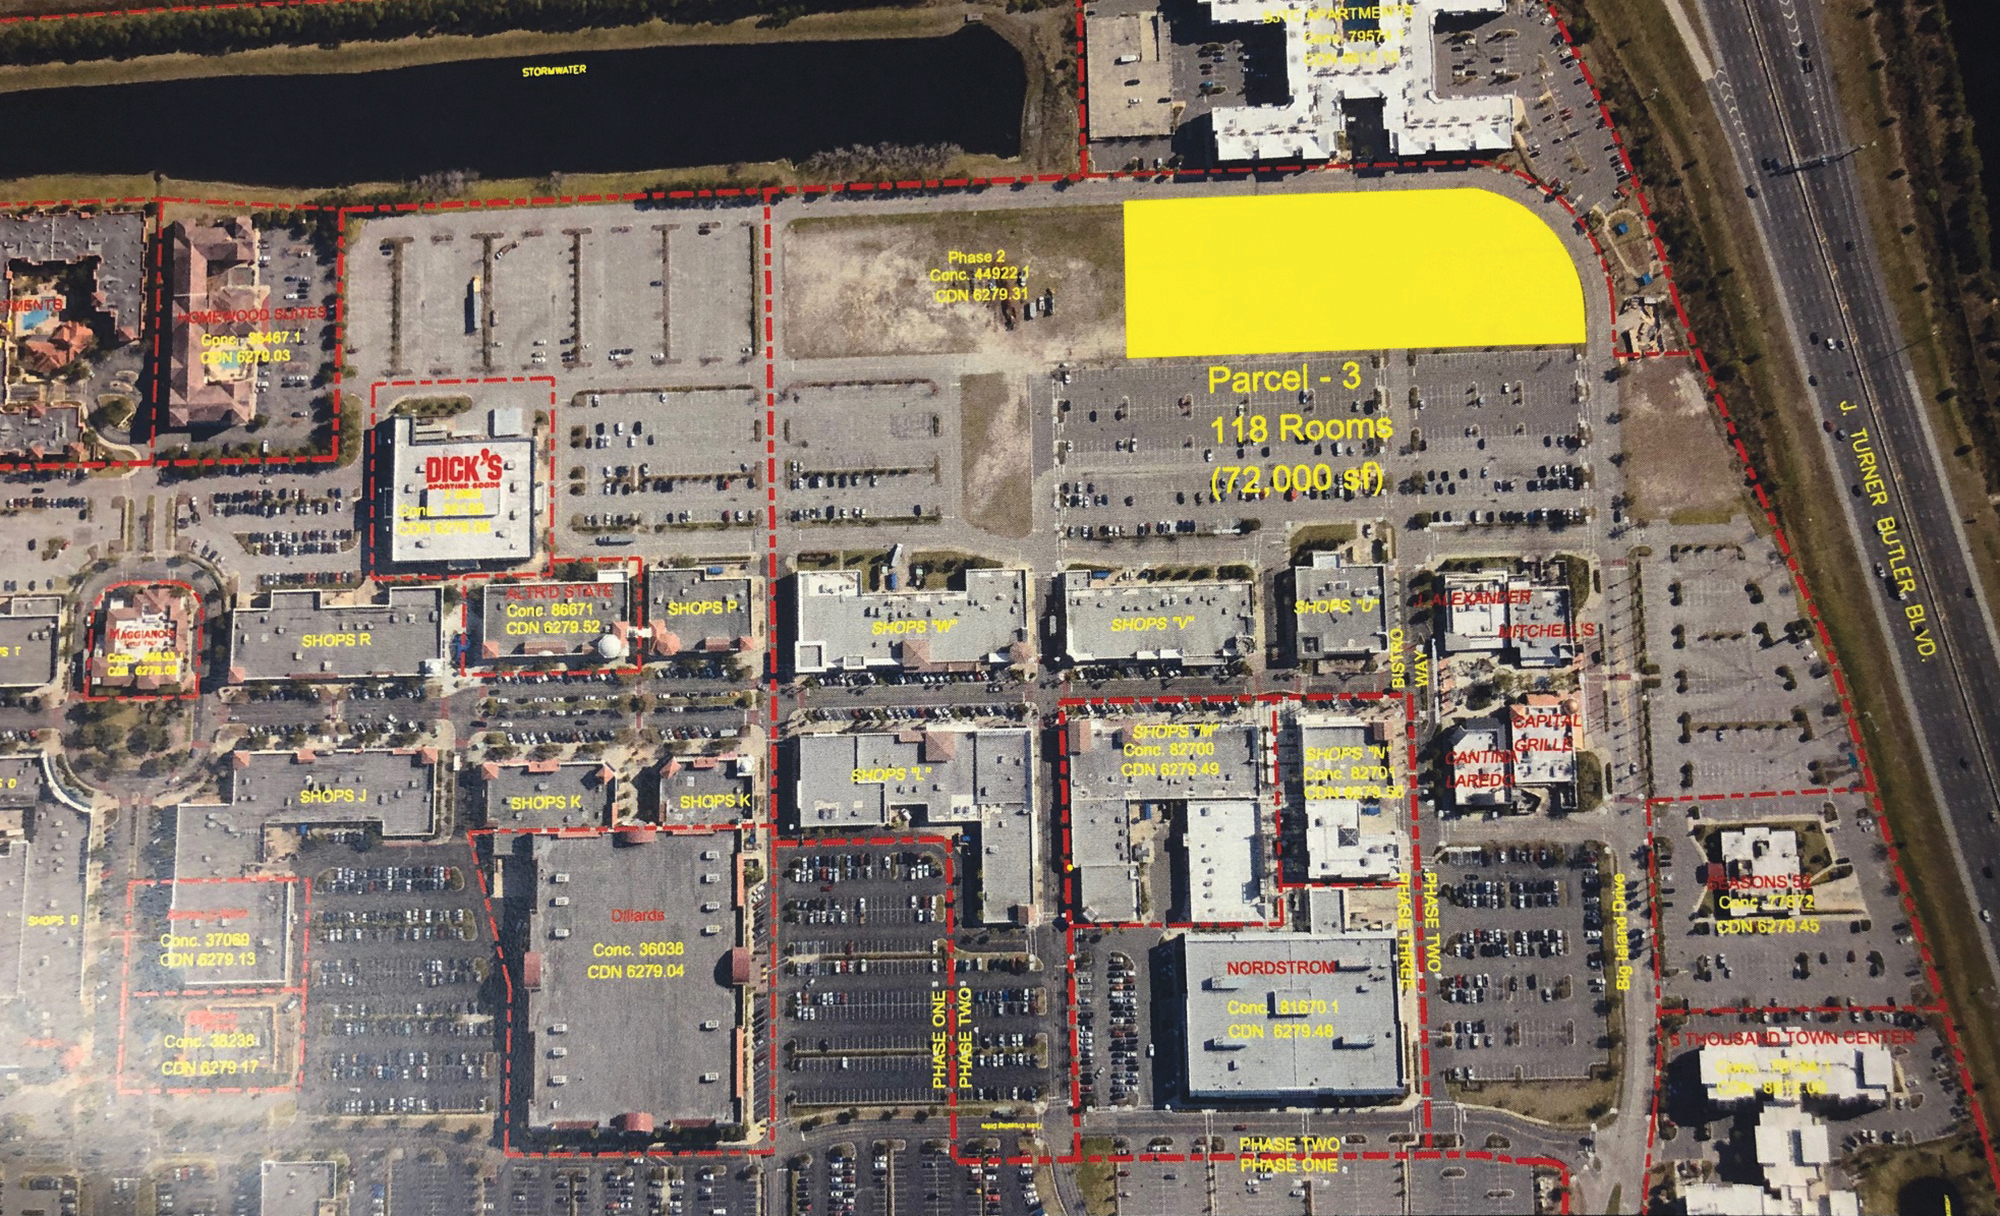 The site is Parcel 3 of Phase 4 of St. Johns Town Center, at northwest Butler Boulevard and Interstate 295. The location is at the southern end of the shopping center.